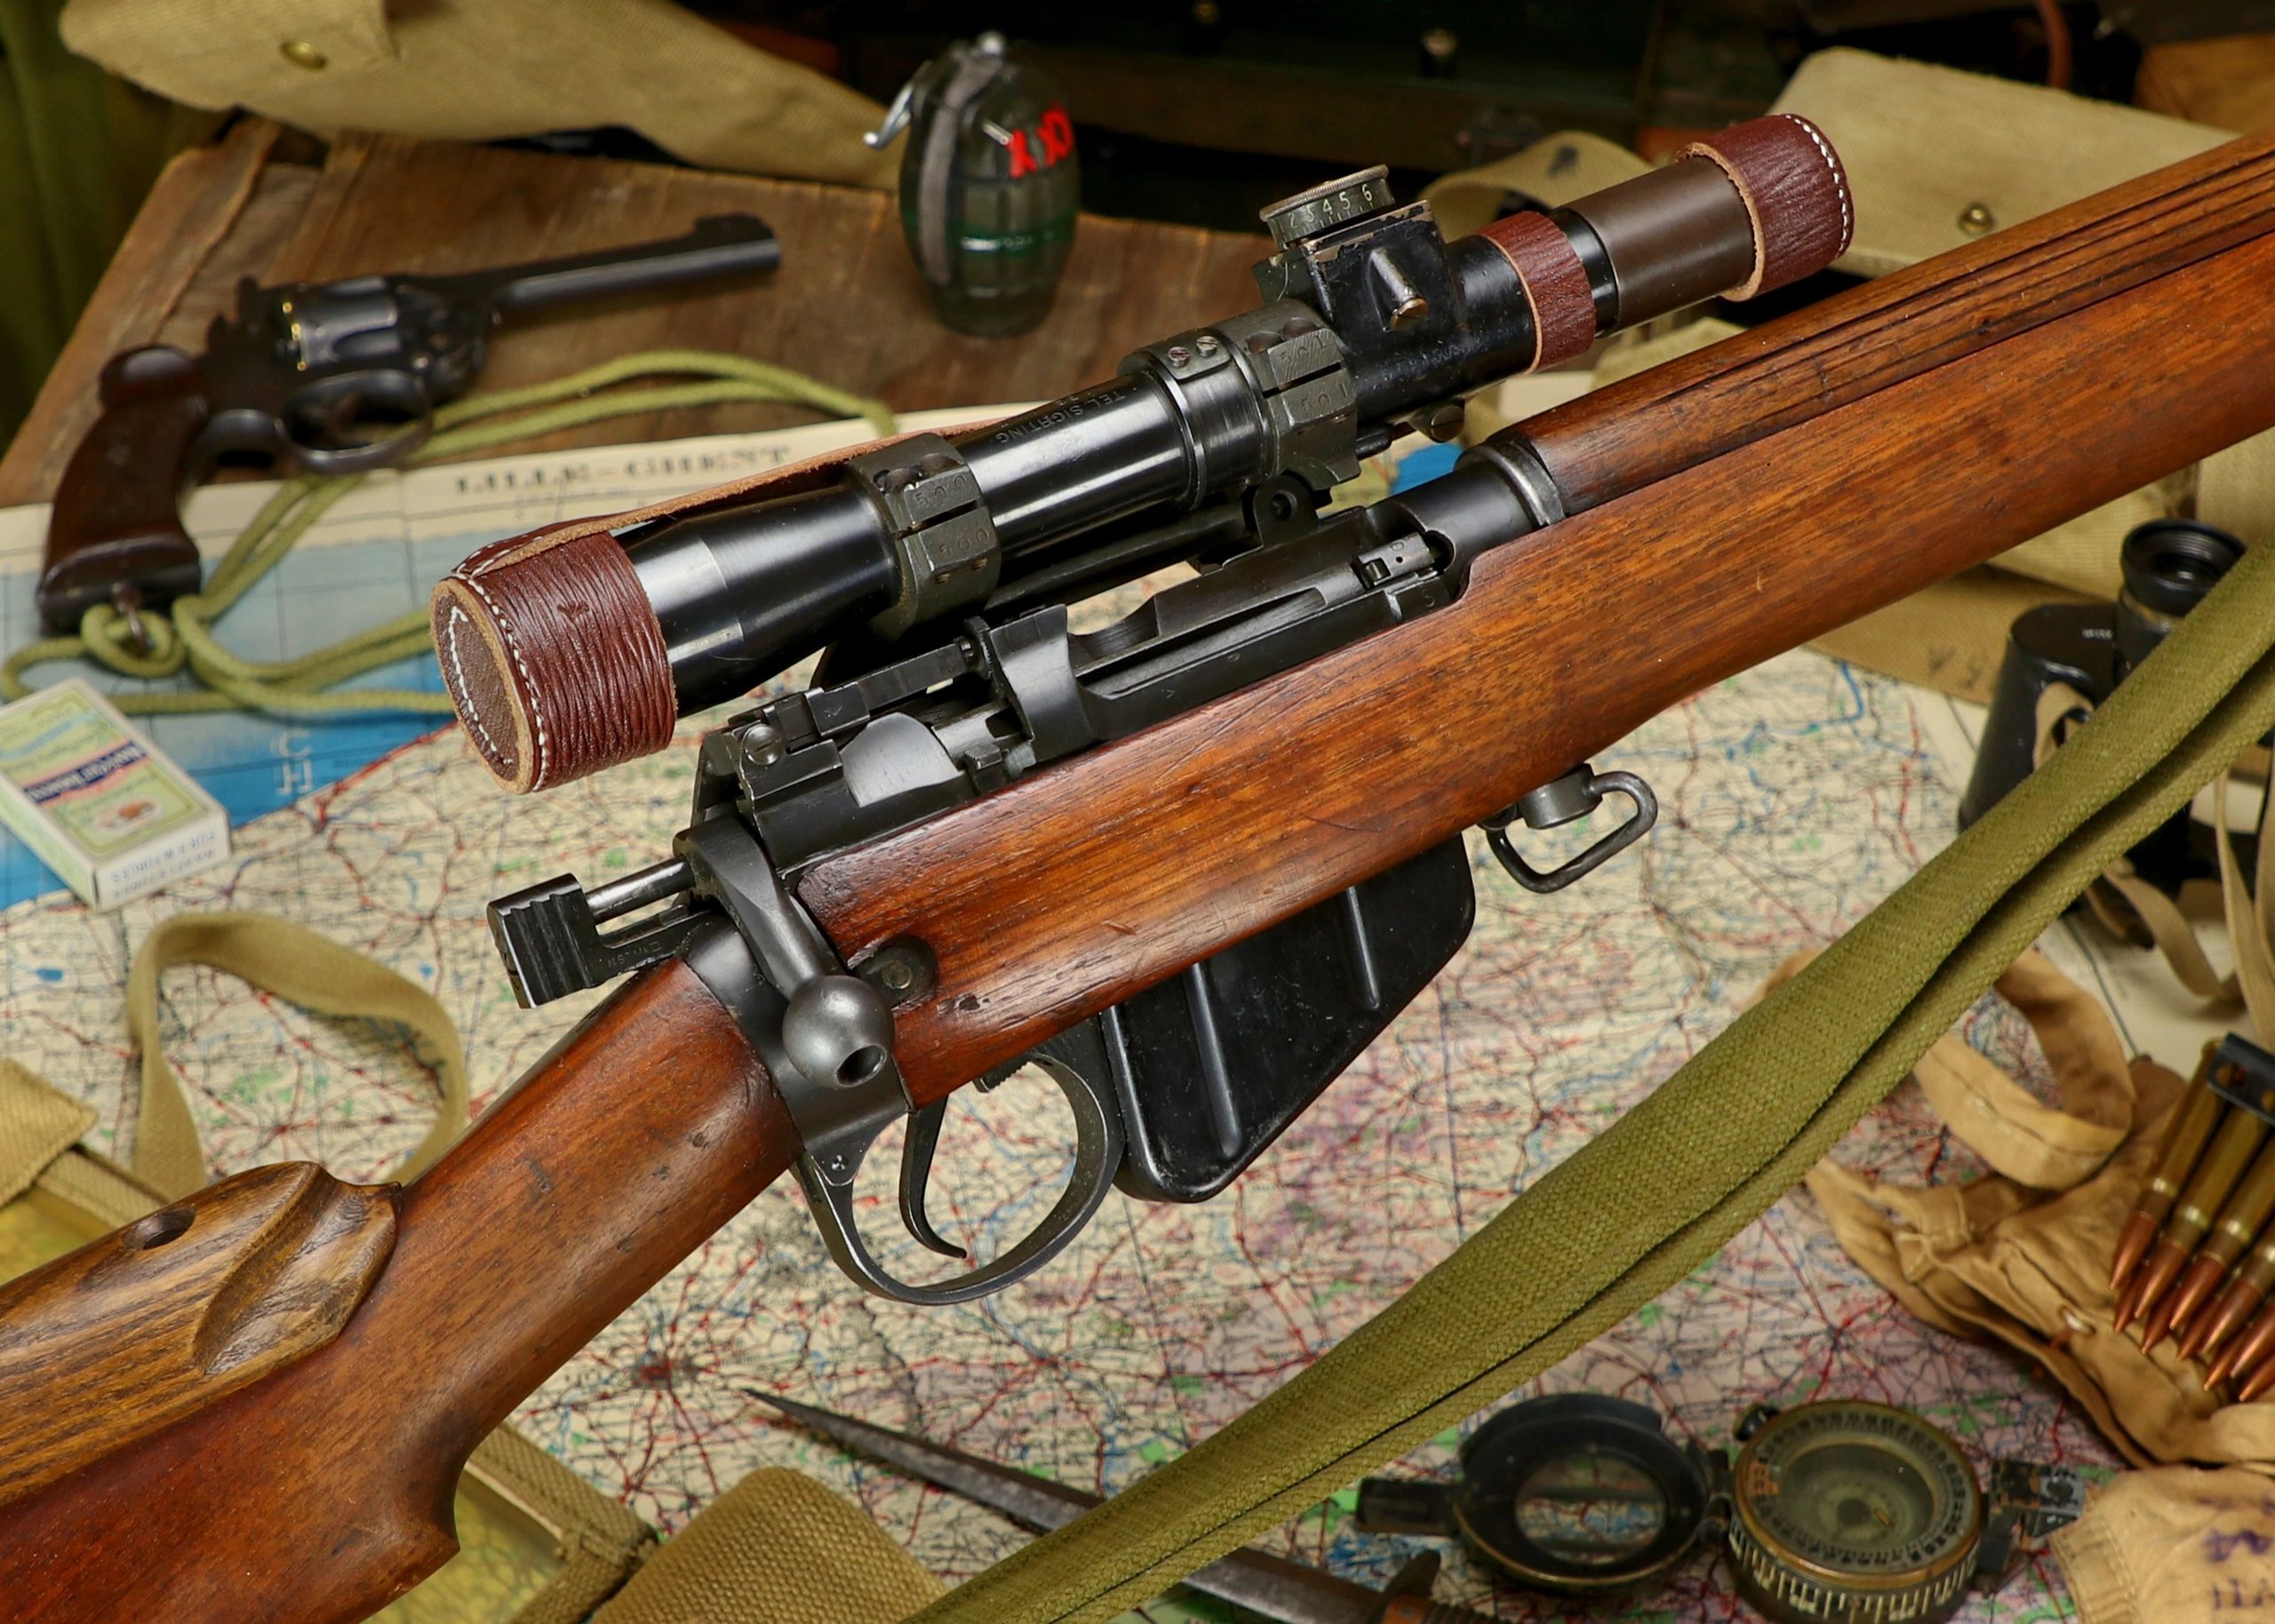 Lee-Enfield Rifle No.4 and the Sniping rifle No.4T